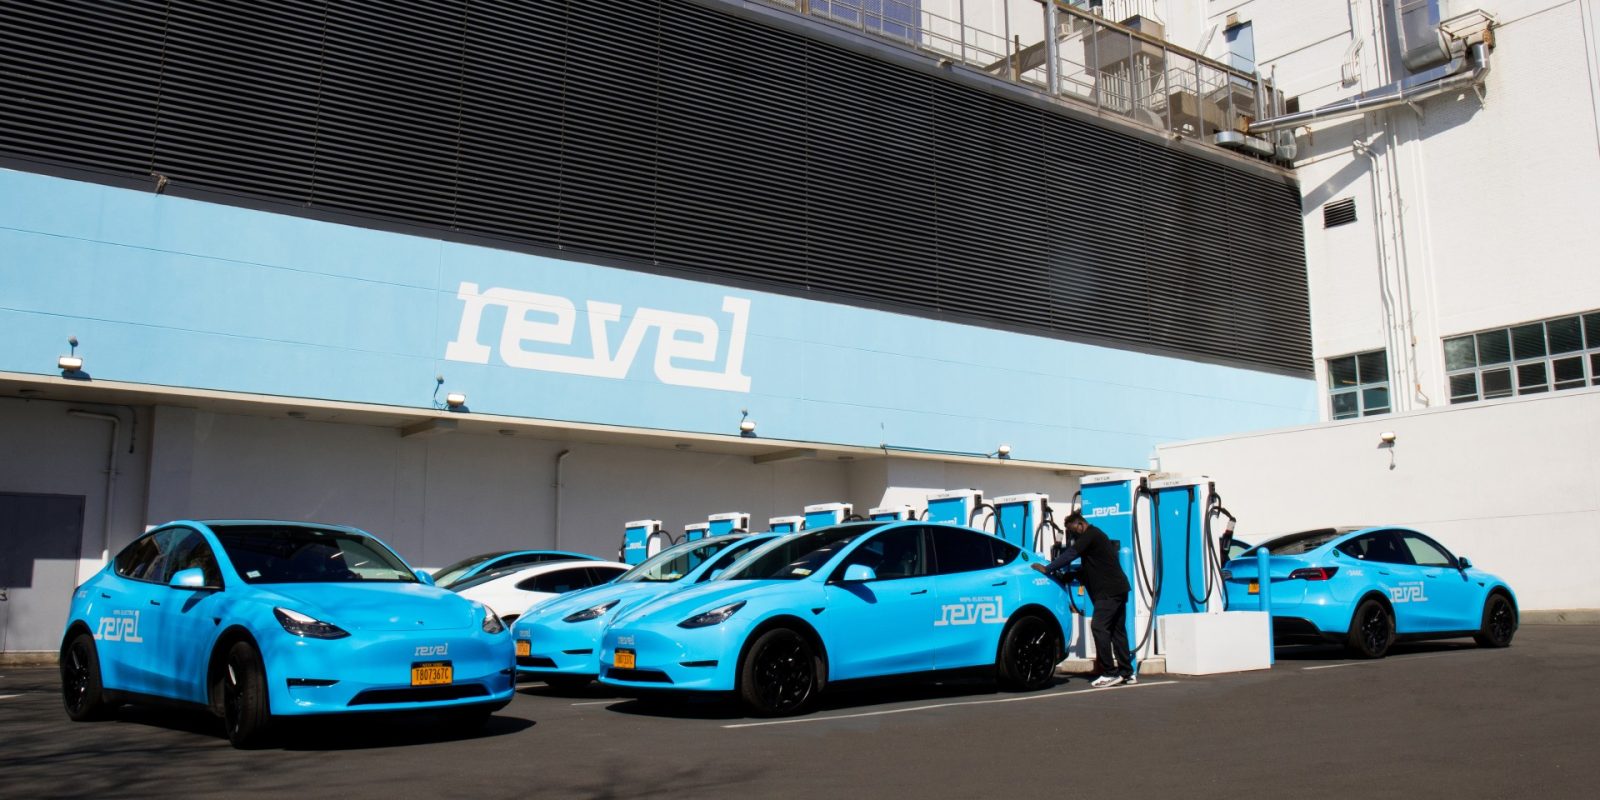 Revel aims to charge up NYC's EV infrastructure